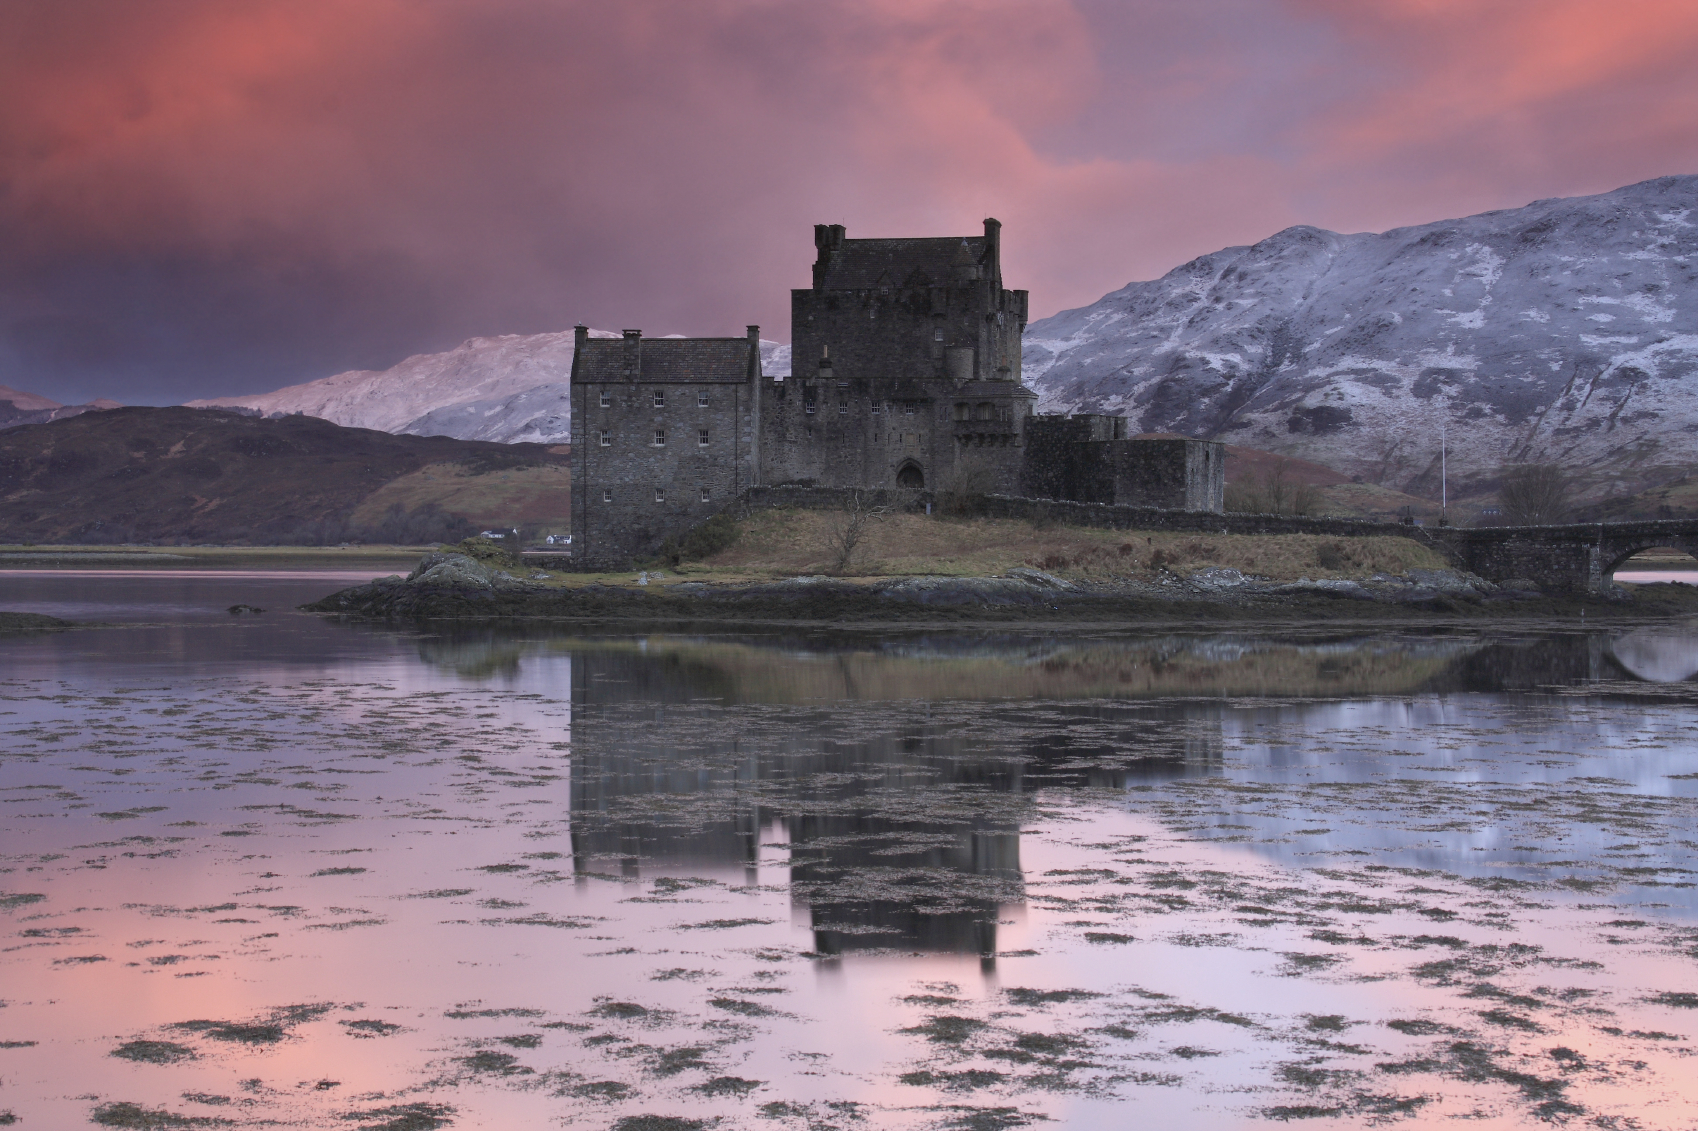 Scottish Castles: Ten of the most majestic and iconic